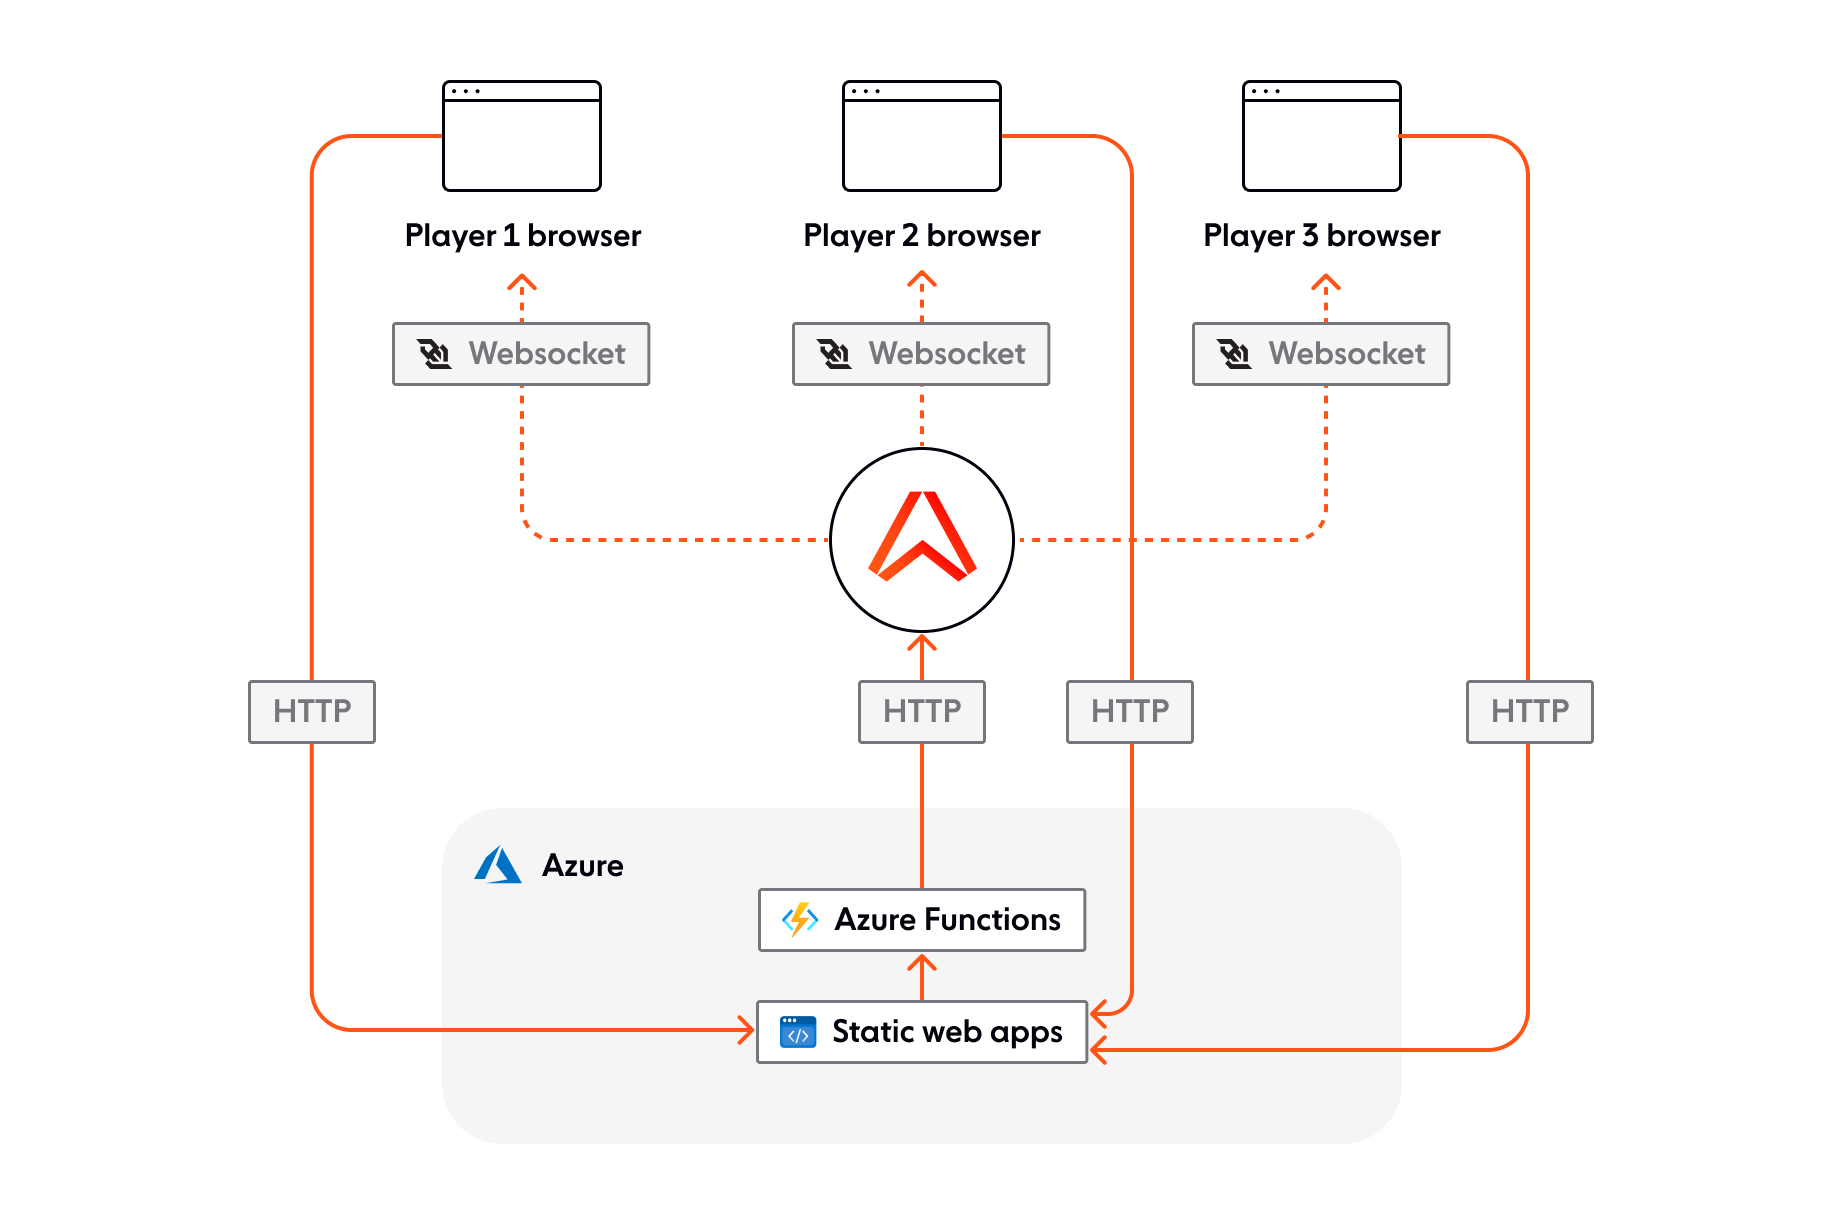 Communication between player devices and the serverless application.